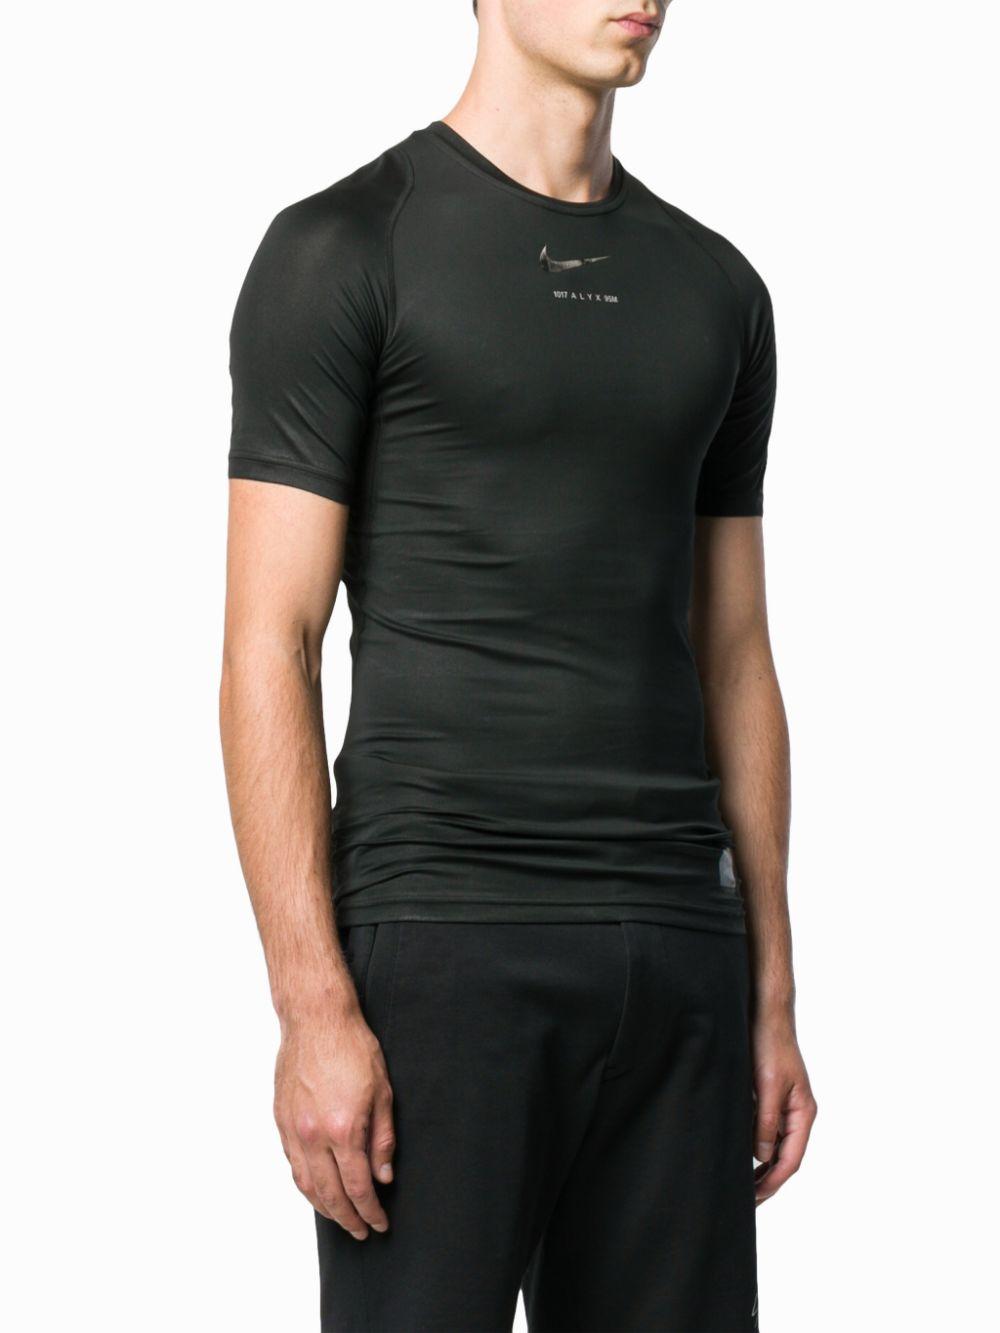 1017 ALYX 9SM Synthetic Tight Fit Sports Top in Black for Men - Lyst